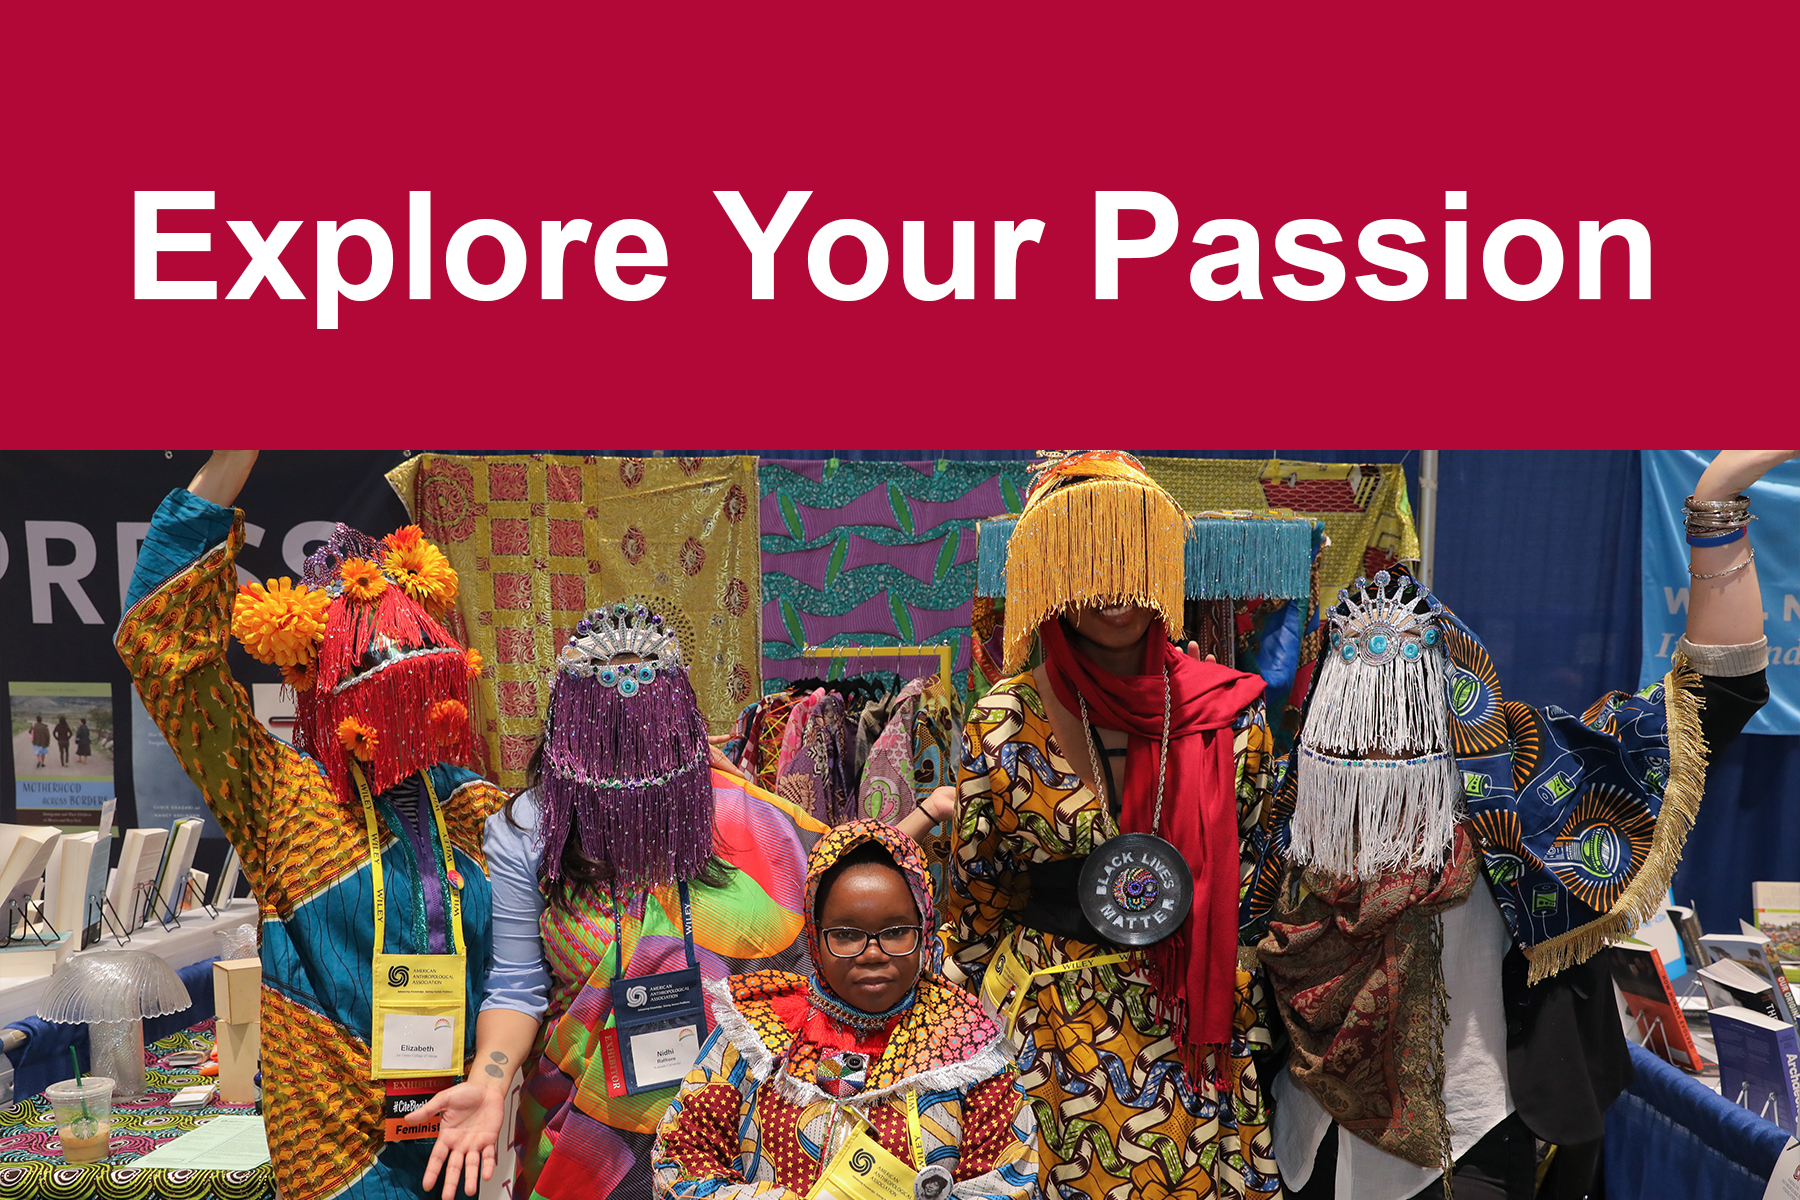 Explore Your Passion text with image of people posing in an exhibit hall